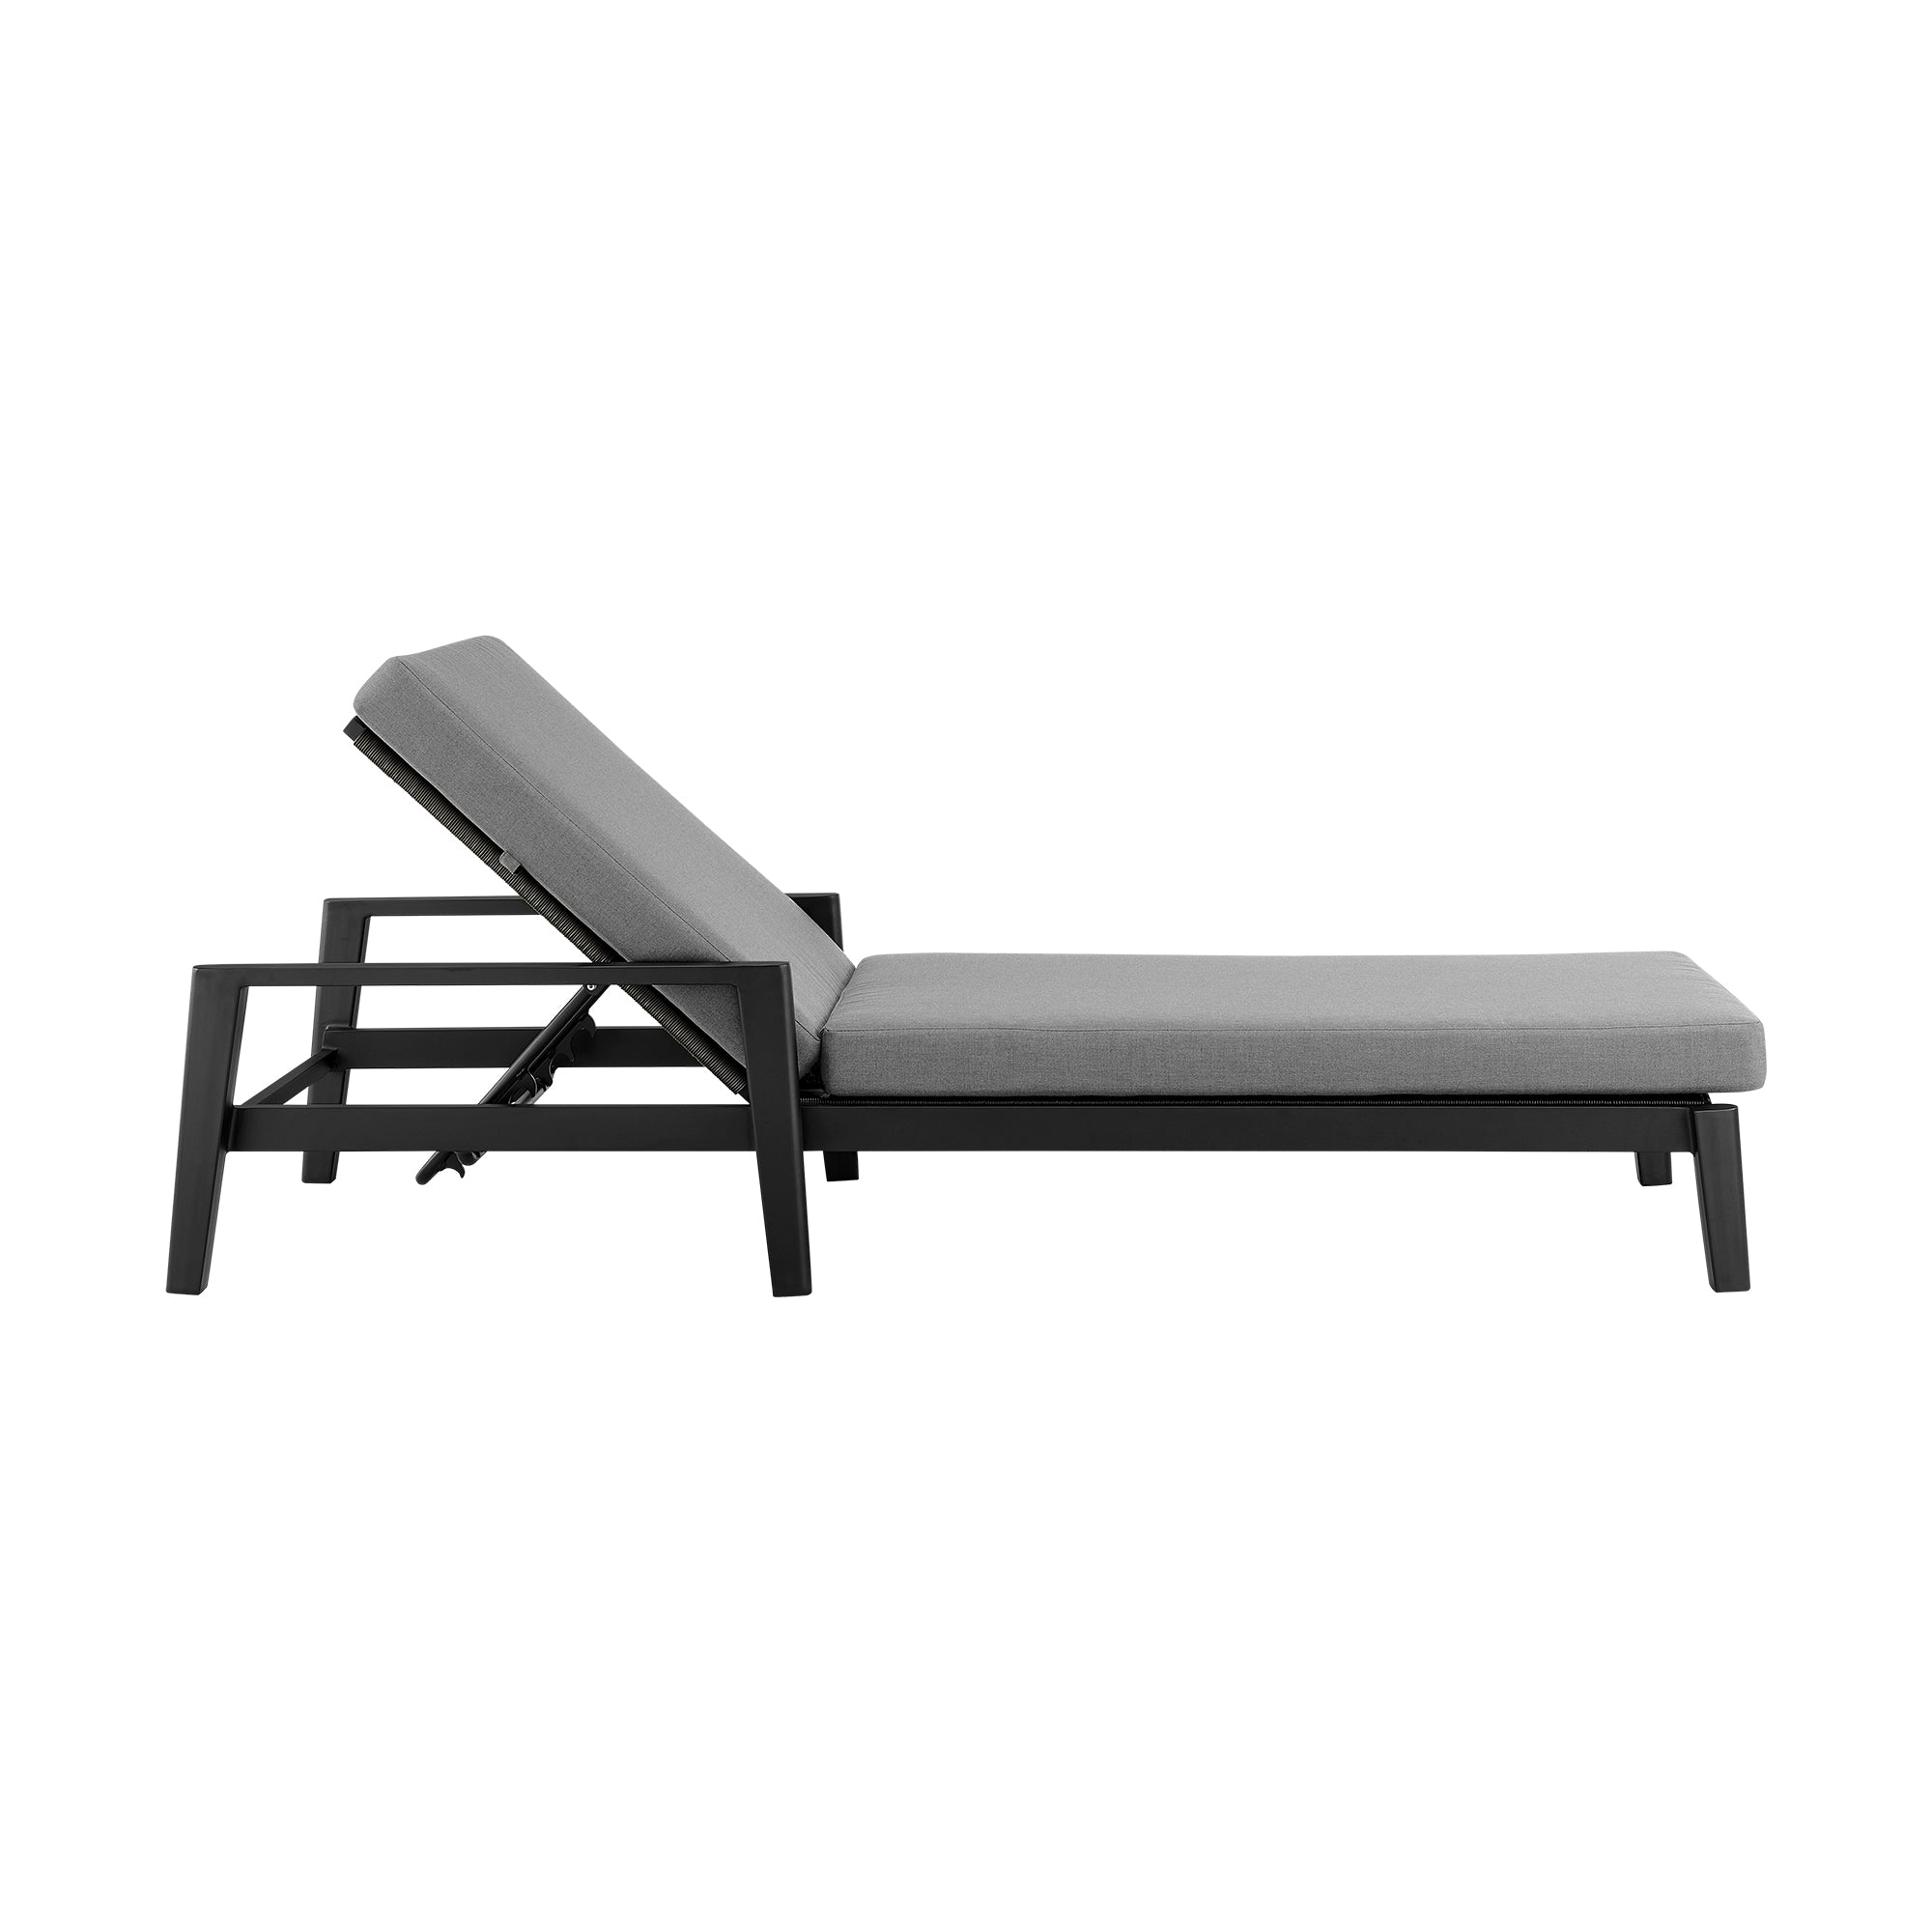 Armen Living - Grand Outdoor Patio Adjustable Chaise Lounge Chair in Aluminum with Grey Cushions - 840254332713